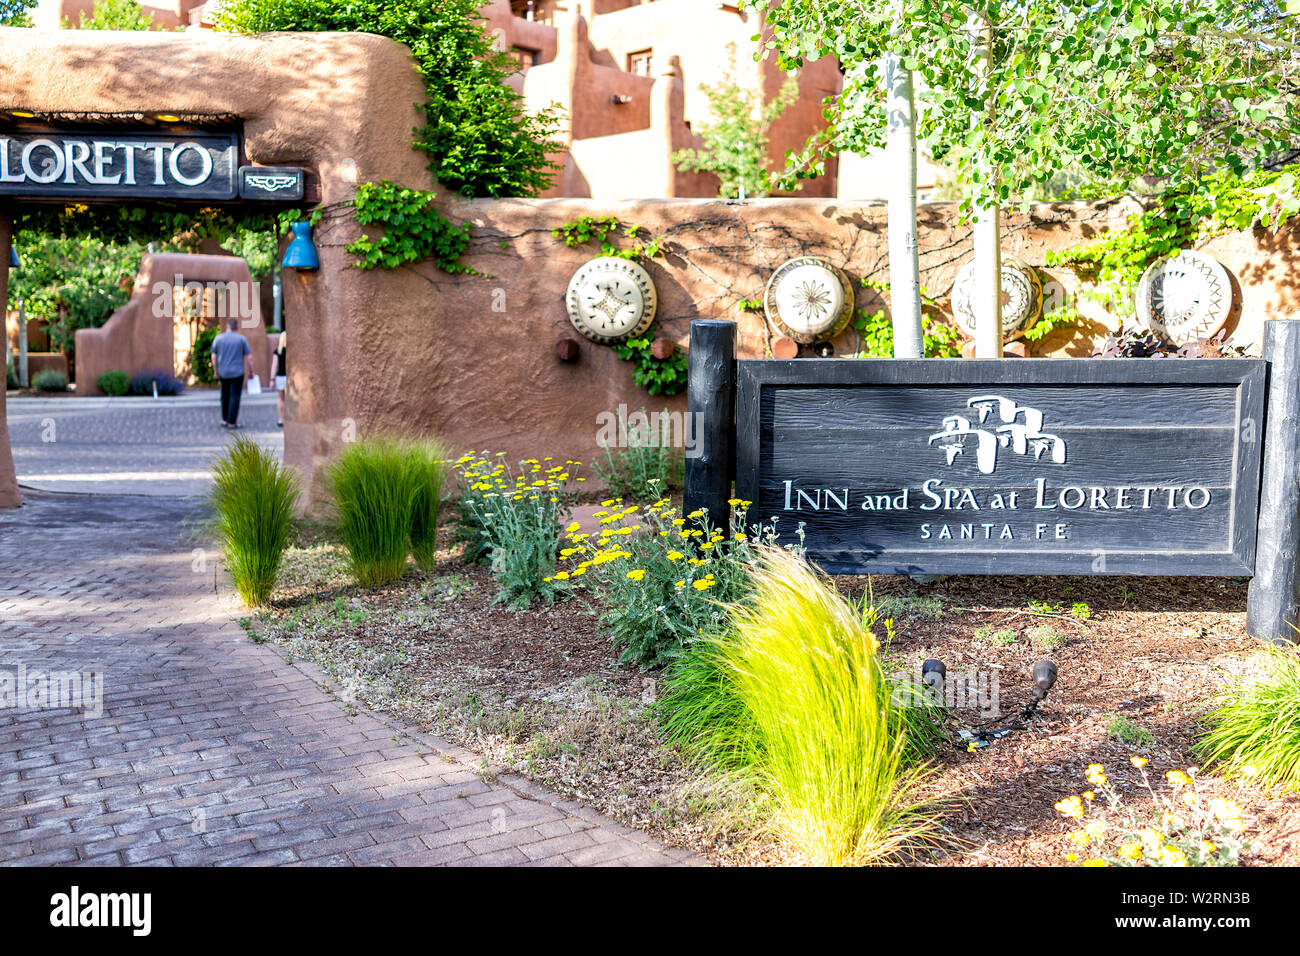 Santa Fe, USA - June 14, 2019: Old town downtown in United States New Mexico city with adobe pueblan style architecture and sign for inn and spa at Lo Stock Photo